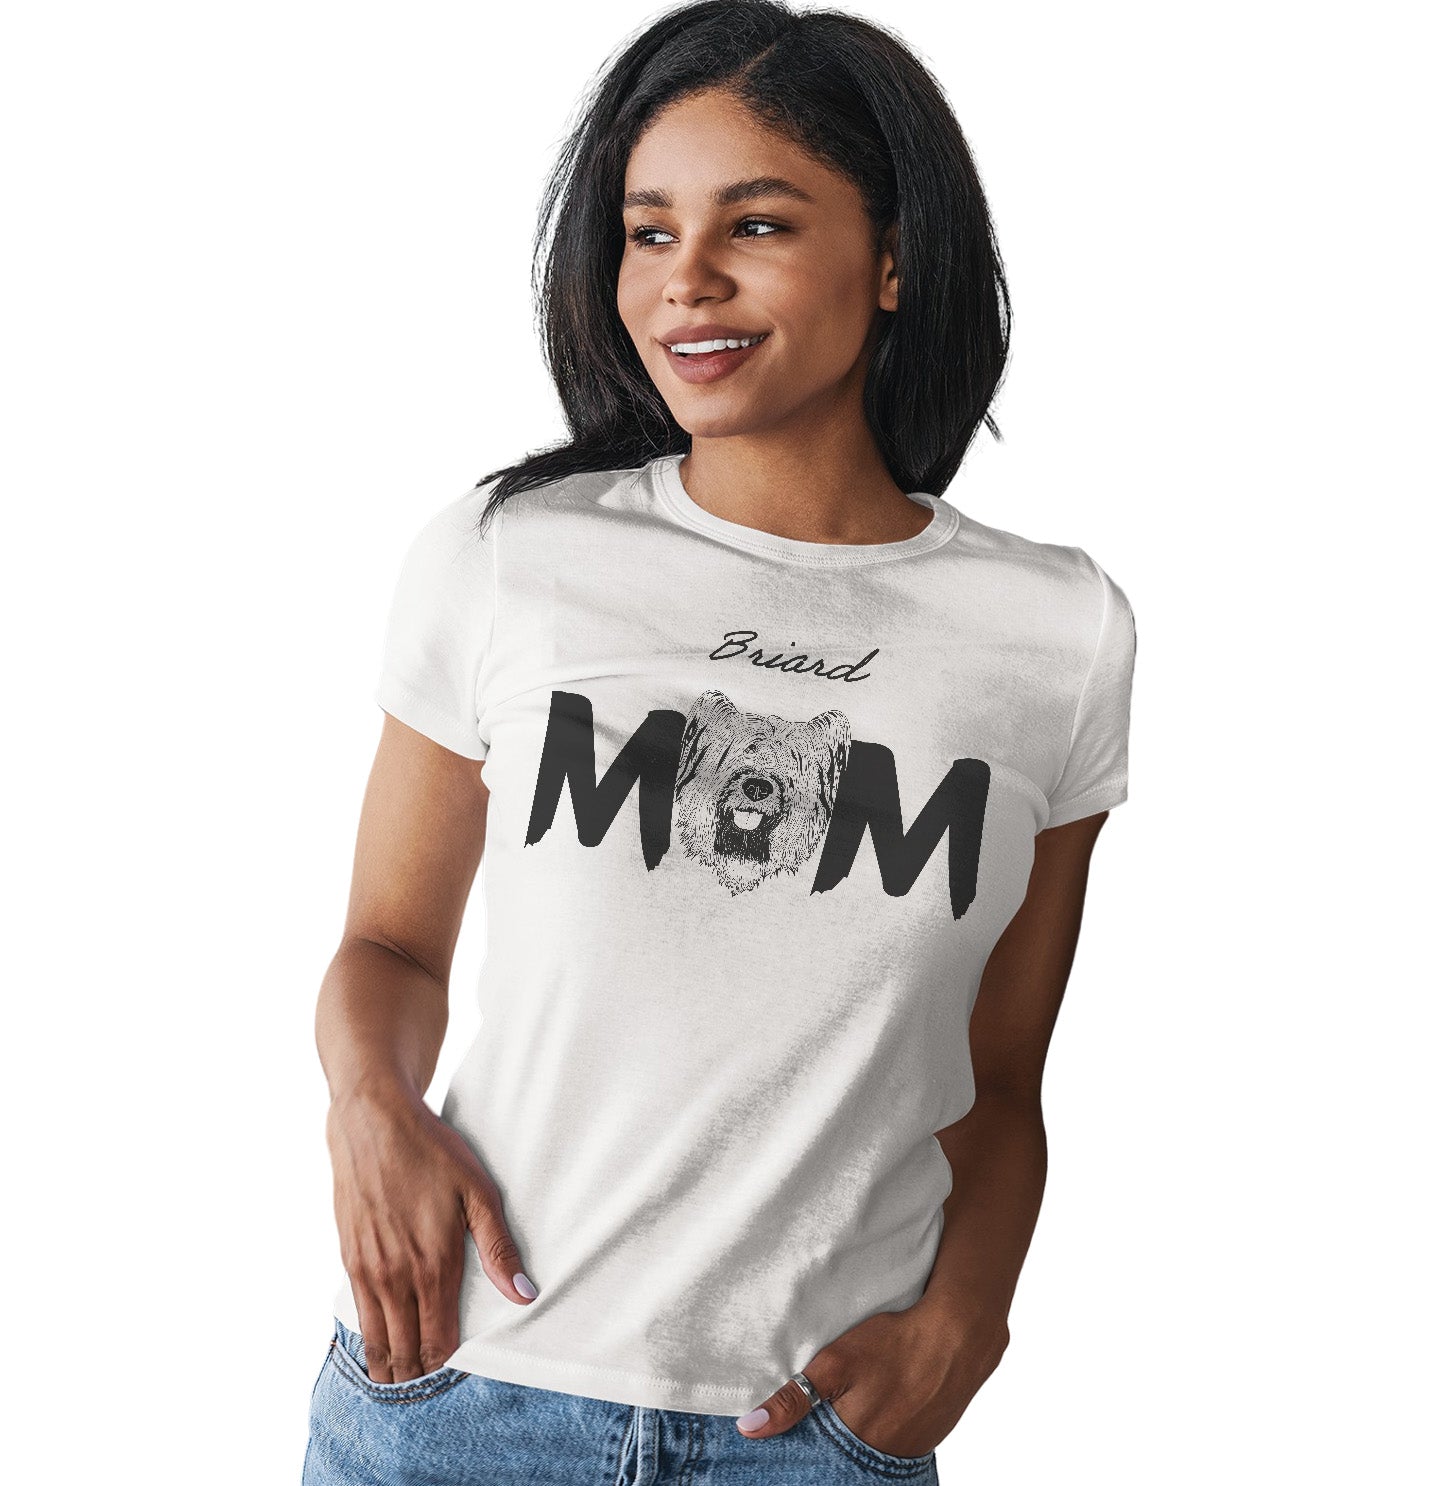 Briard Breed Mom - Women's Fitted T-Shirt